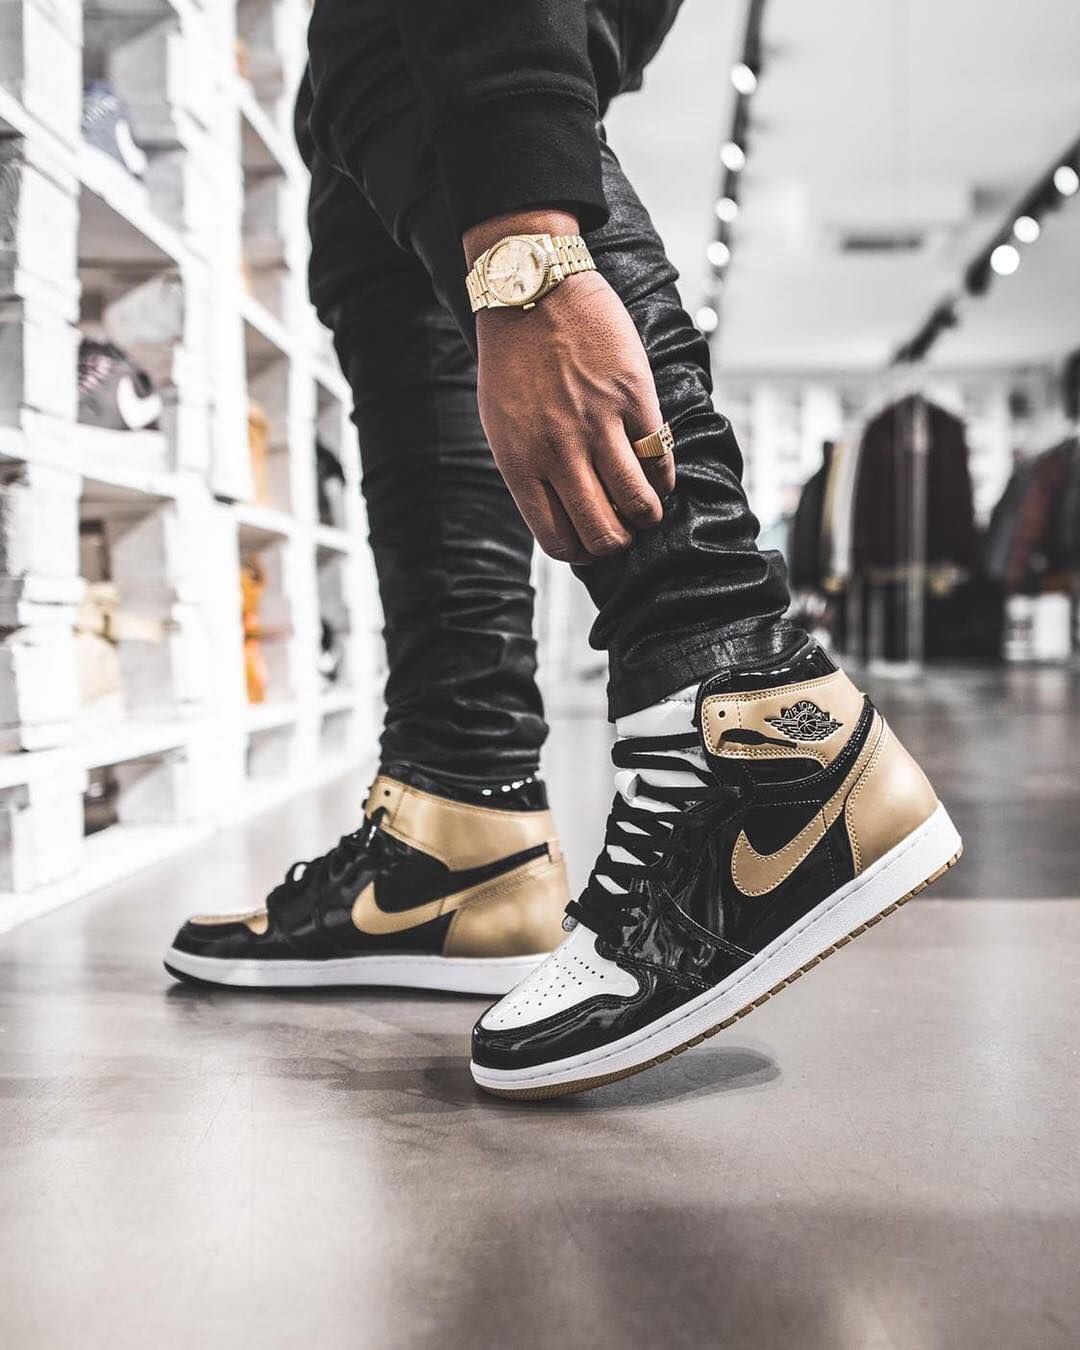 Myth on Twitter: "The Air Jordan 1 Retro High OG Energy 'Gold Top 3' Releasing Today, In Store and Online, From 8am https://t.co/2Of9eiqZWR https://t.co/2Eji8utcas" / Twitter